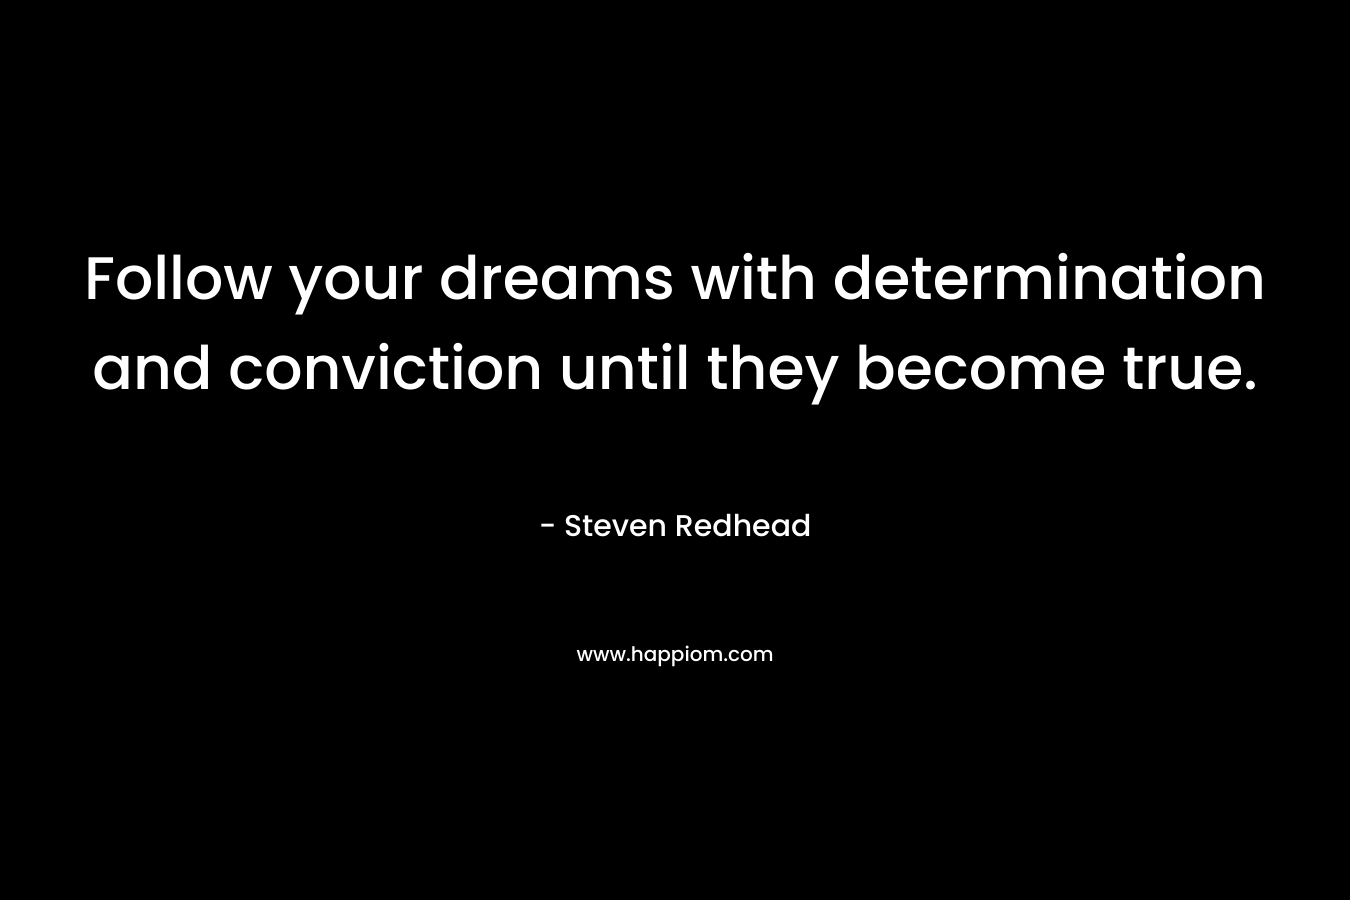 Follow your dreams with determination and conviction until they become true.